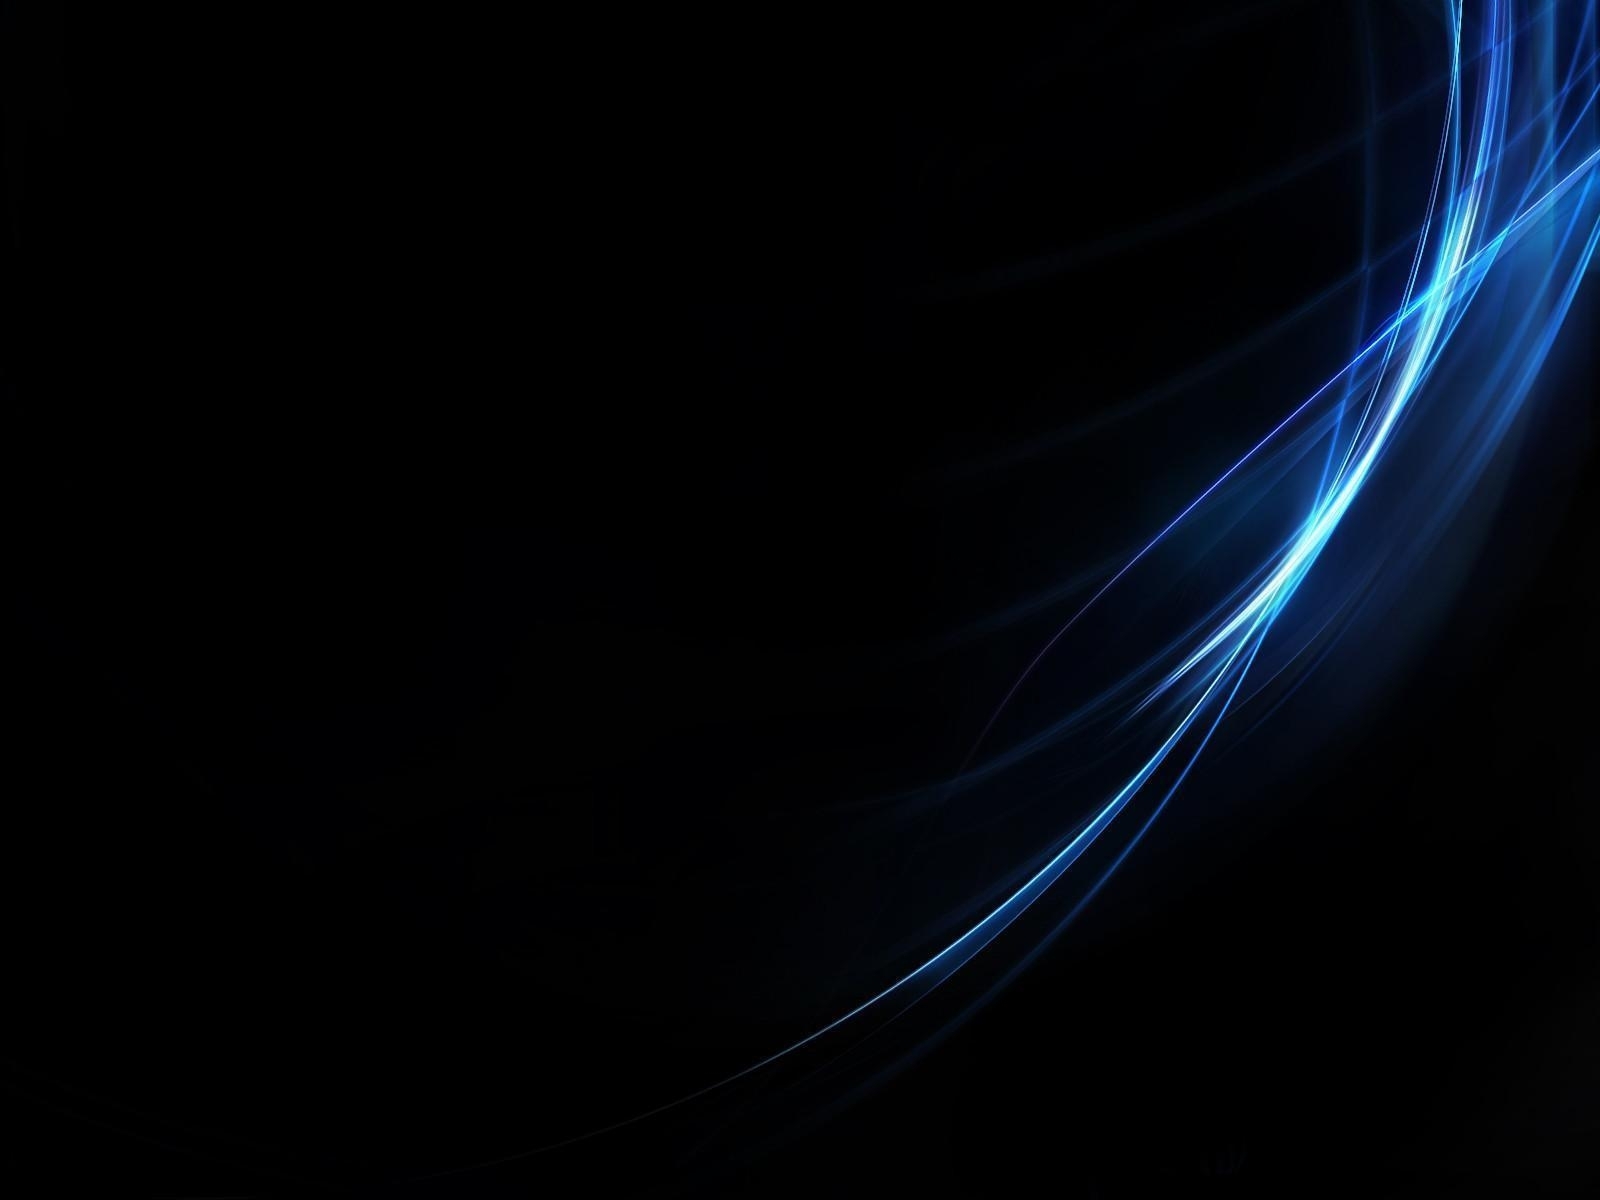 10 Top Blue And Black Abstract Wallpapers FULL HD 1920×1080 For PC Desktop